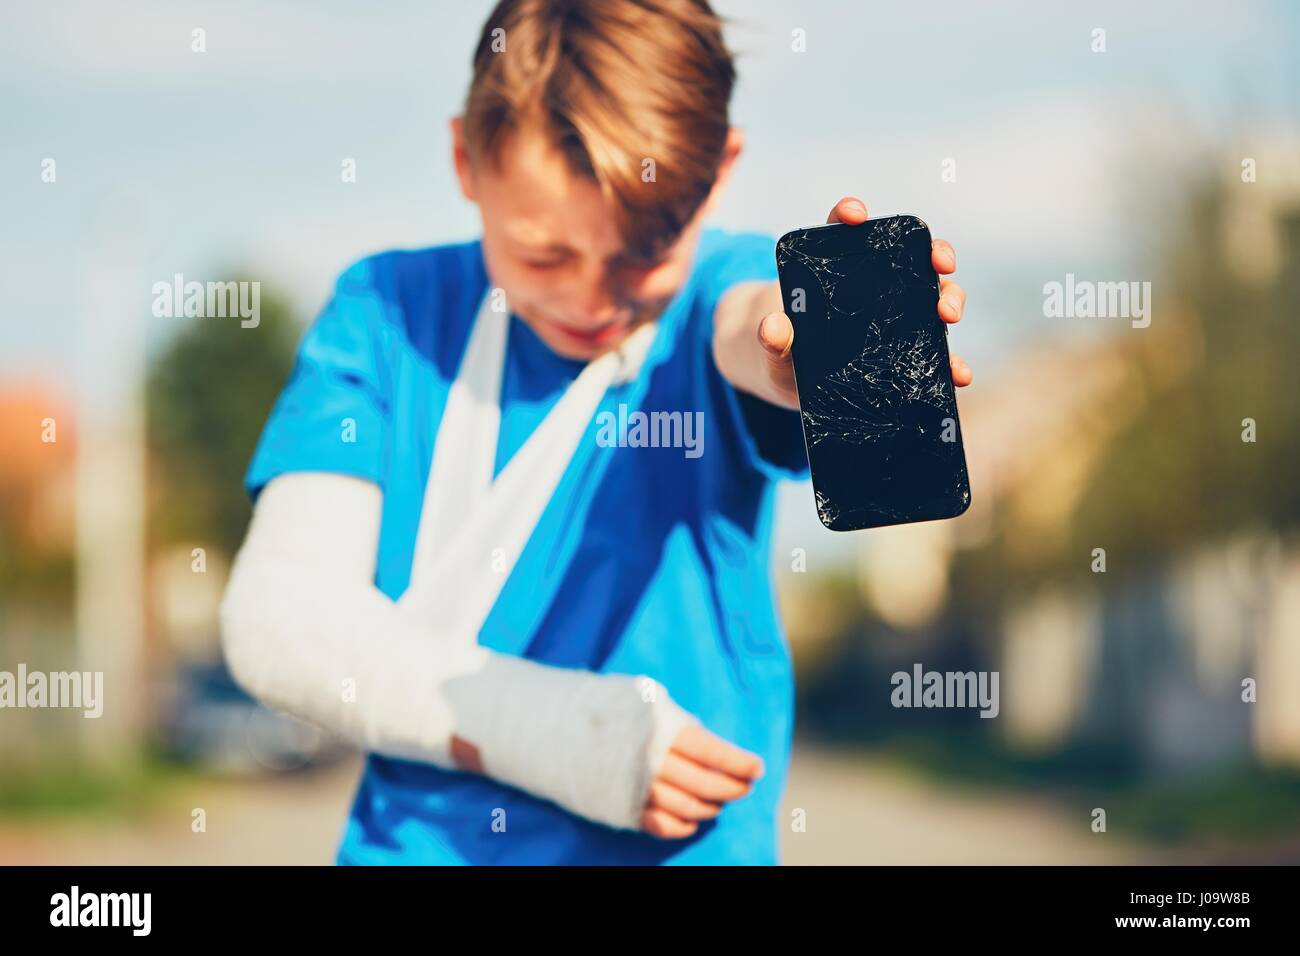 Little boy with broken hand injured after accident showing damaged mobile phone Stock Photo